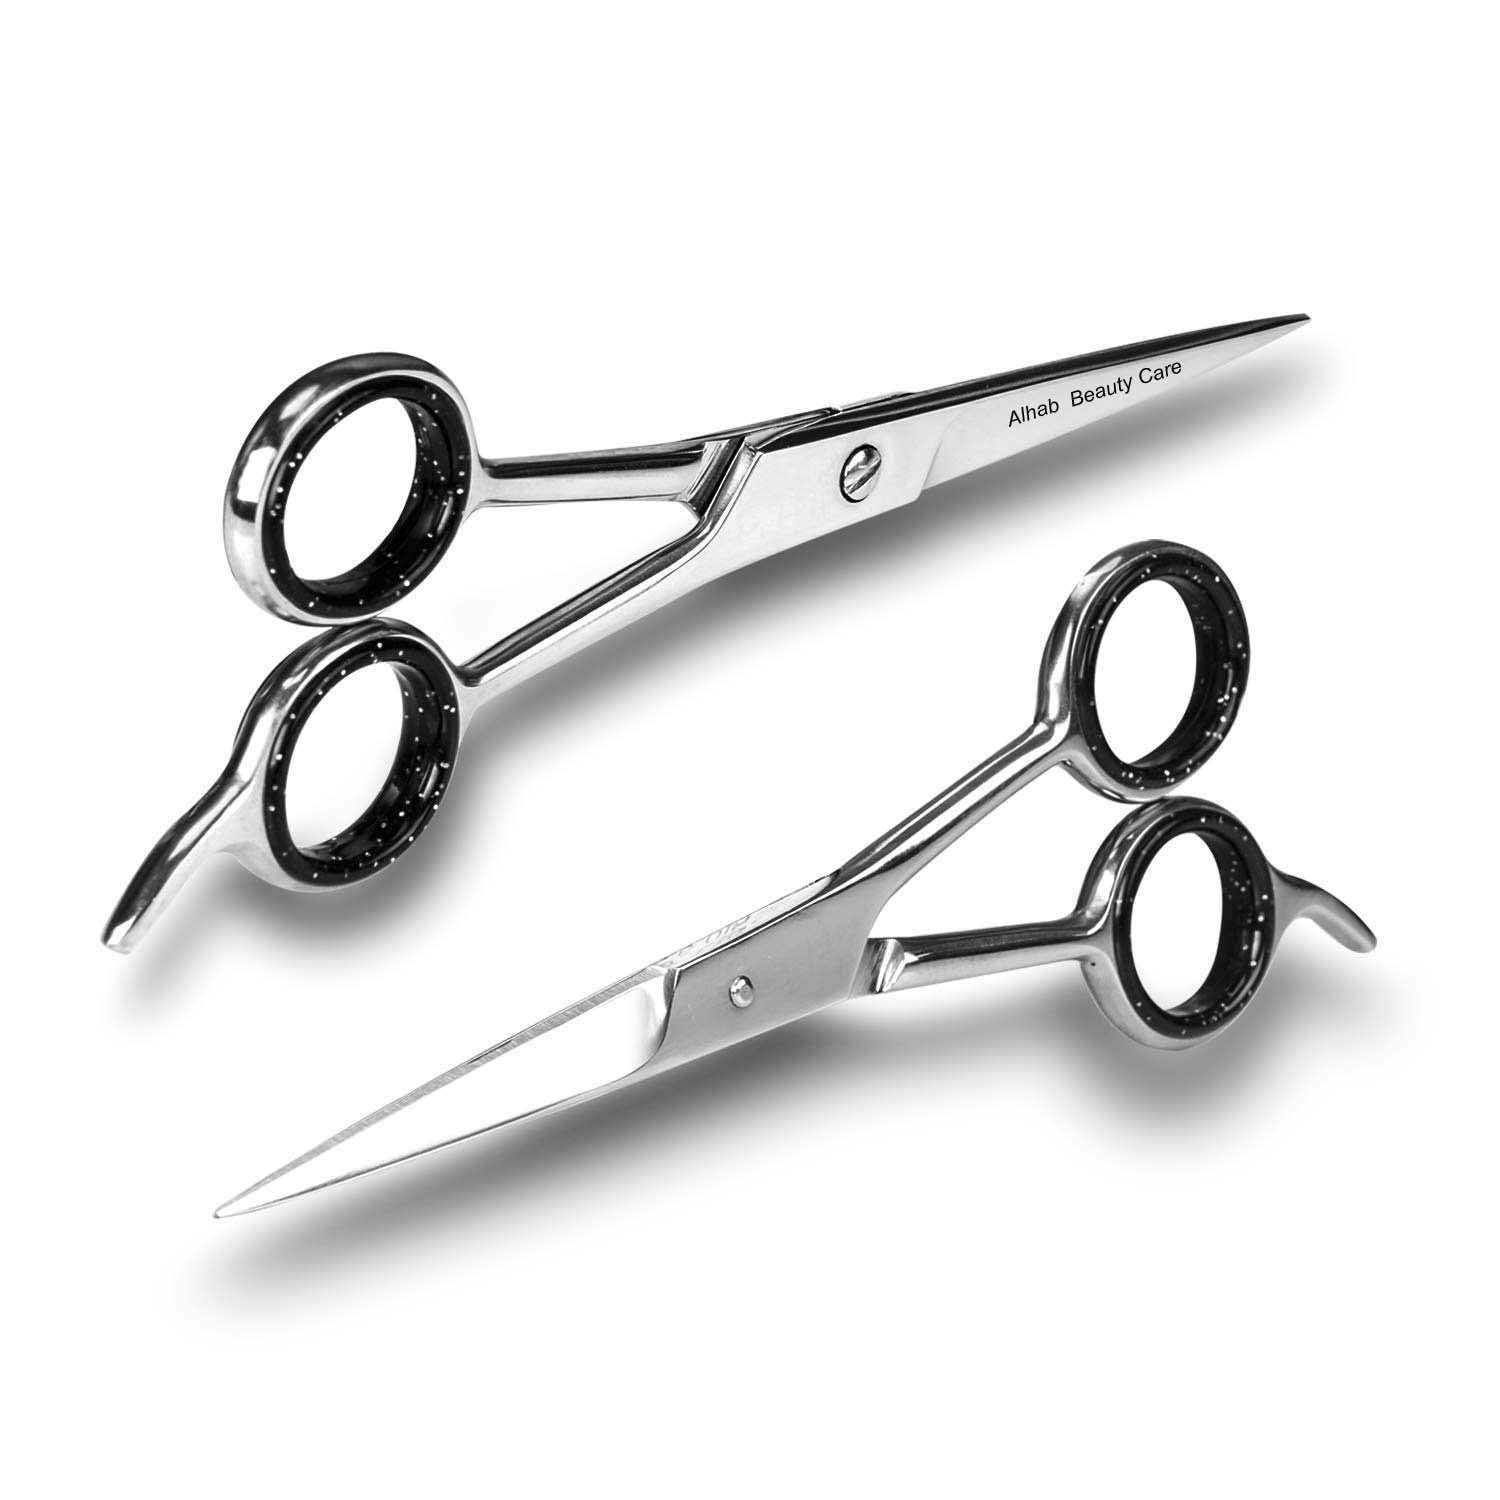 Professional Barber Hair Cutting Scissors/Shears  Stainless Steel Reinforced with Chromium to Resist